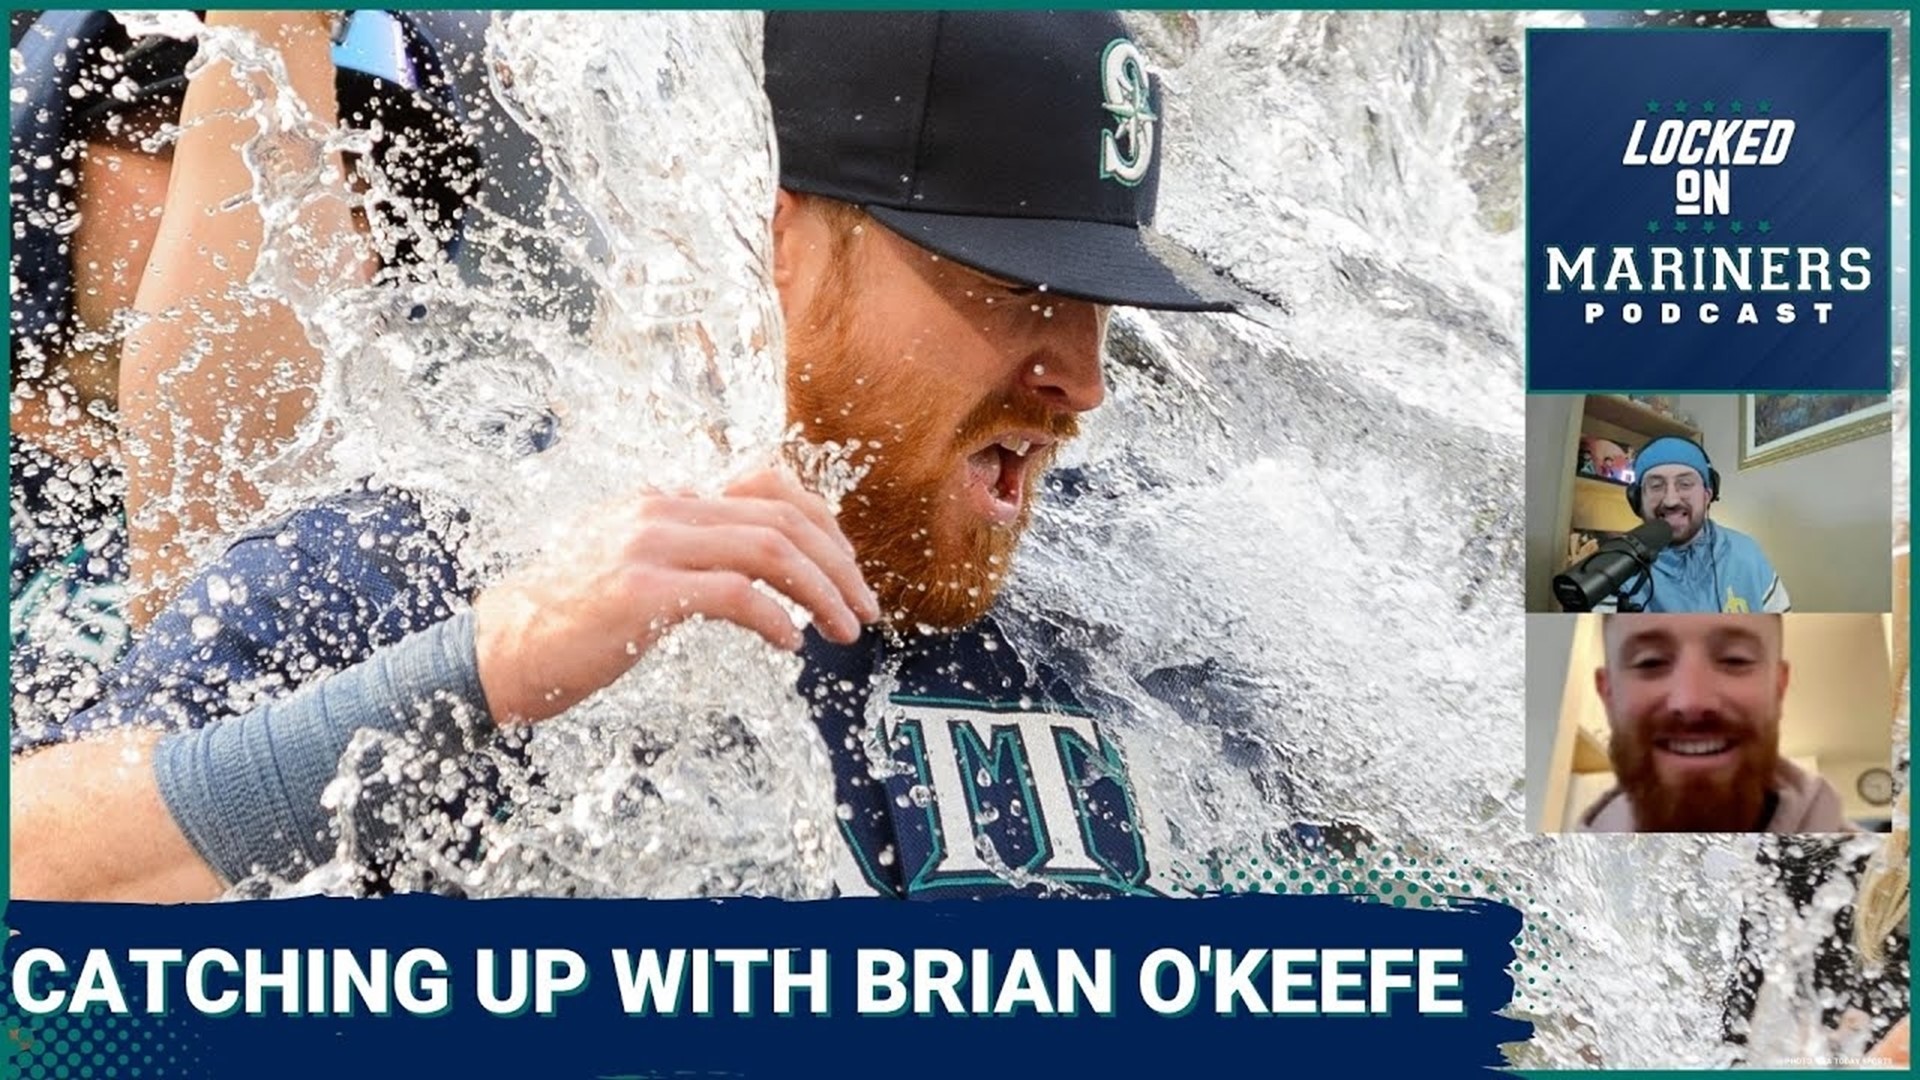 Mariners catcher Brian O'Keefe joins Locked On Mariners host Ty Dane Gonzalez to discuss his red-hot start in Tacoma, making his MLB debut last October.